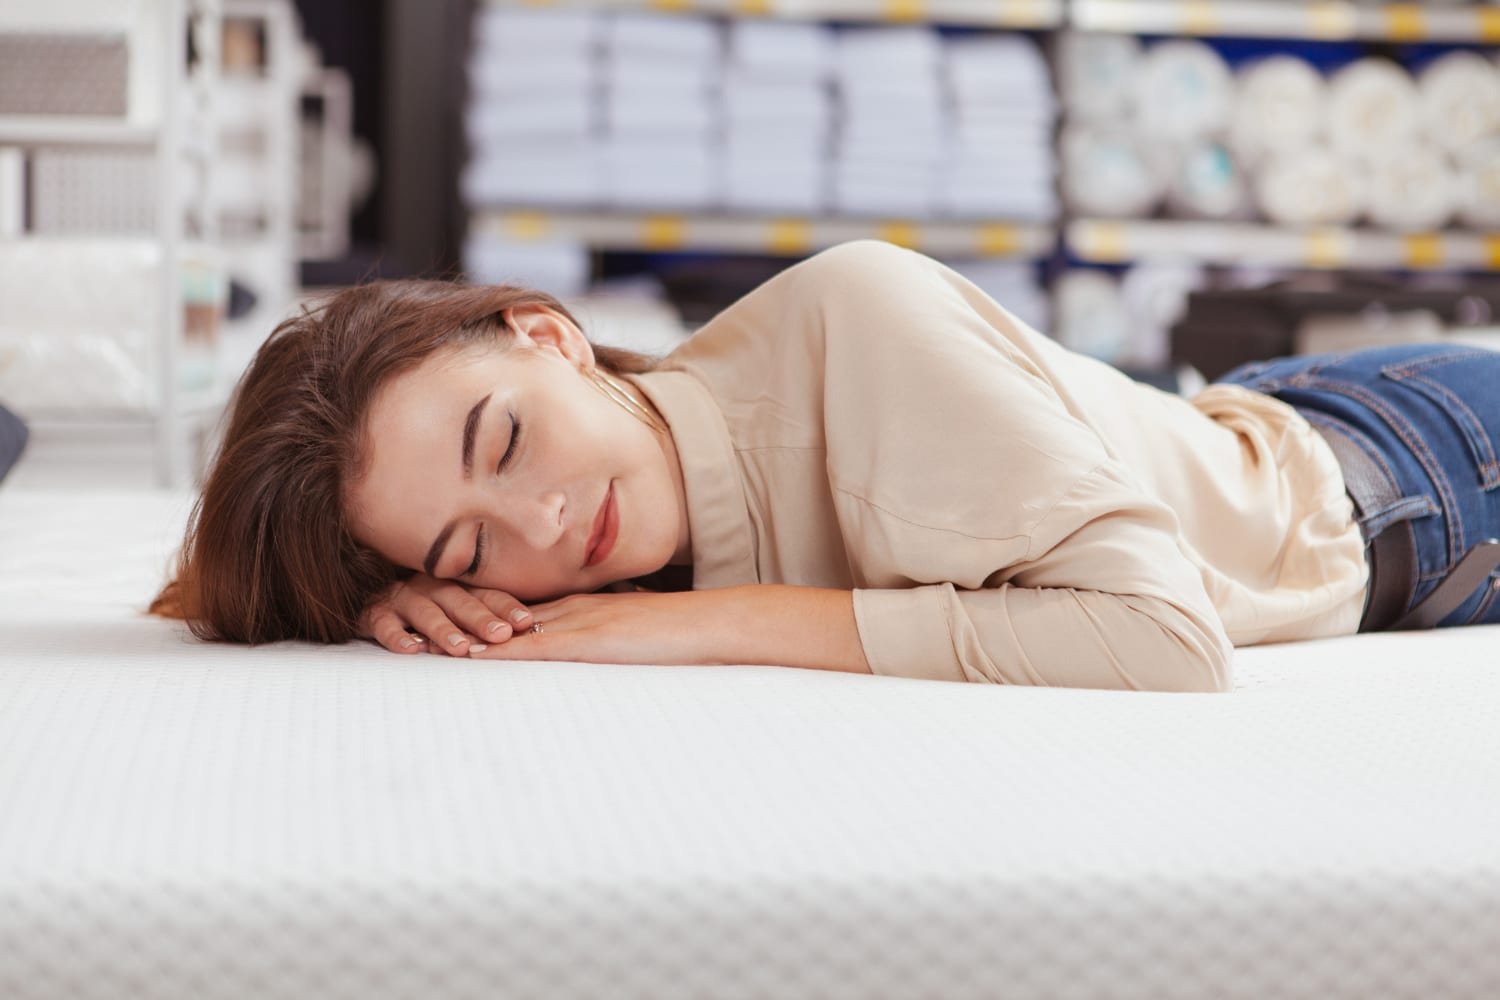 You are currently viewing Sleep Comfortably With ViscoSoft’s High-Quality Memory Foam Mattresses